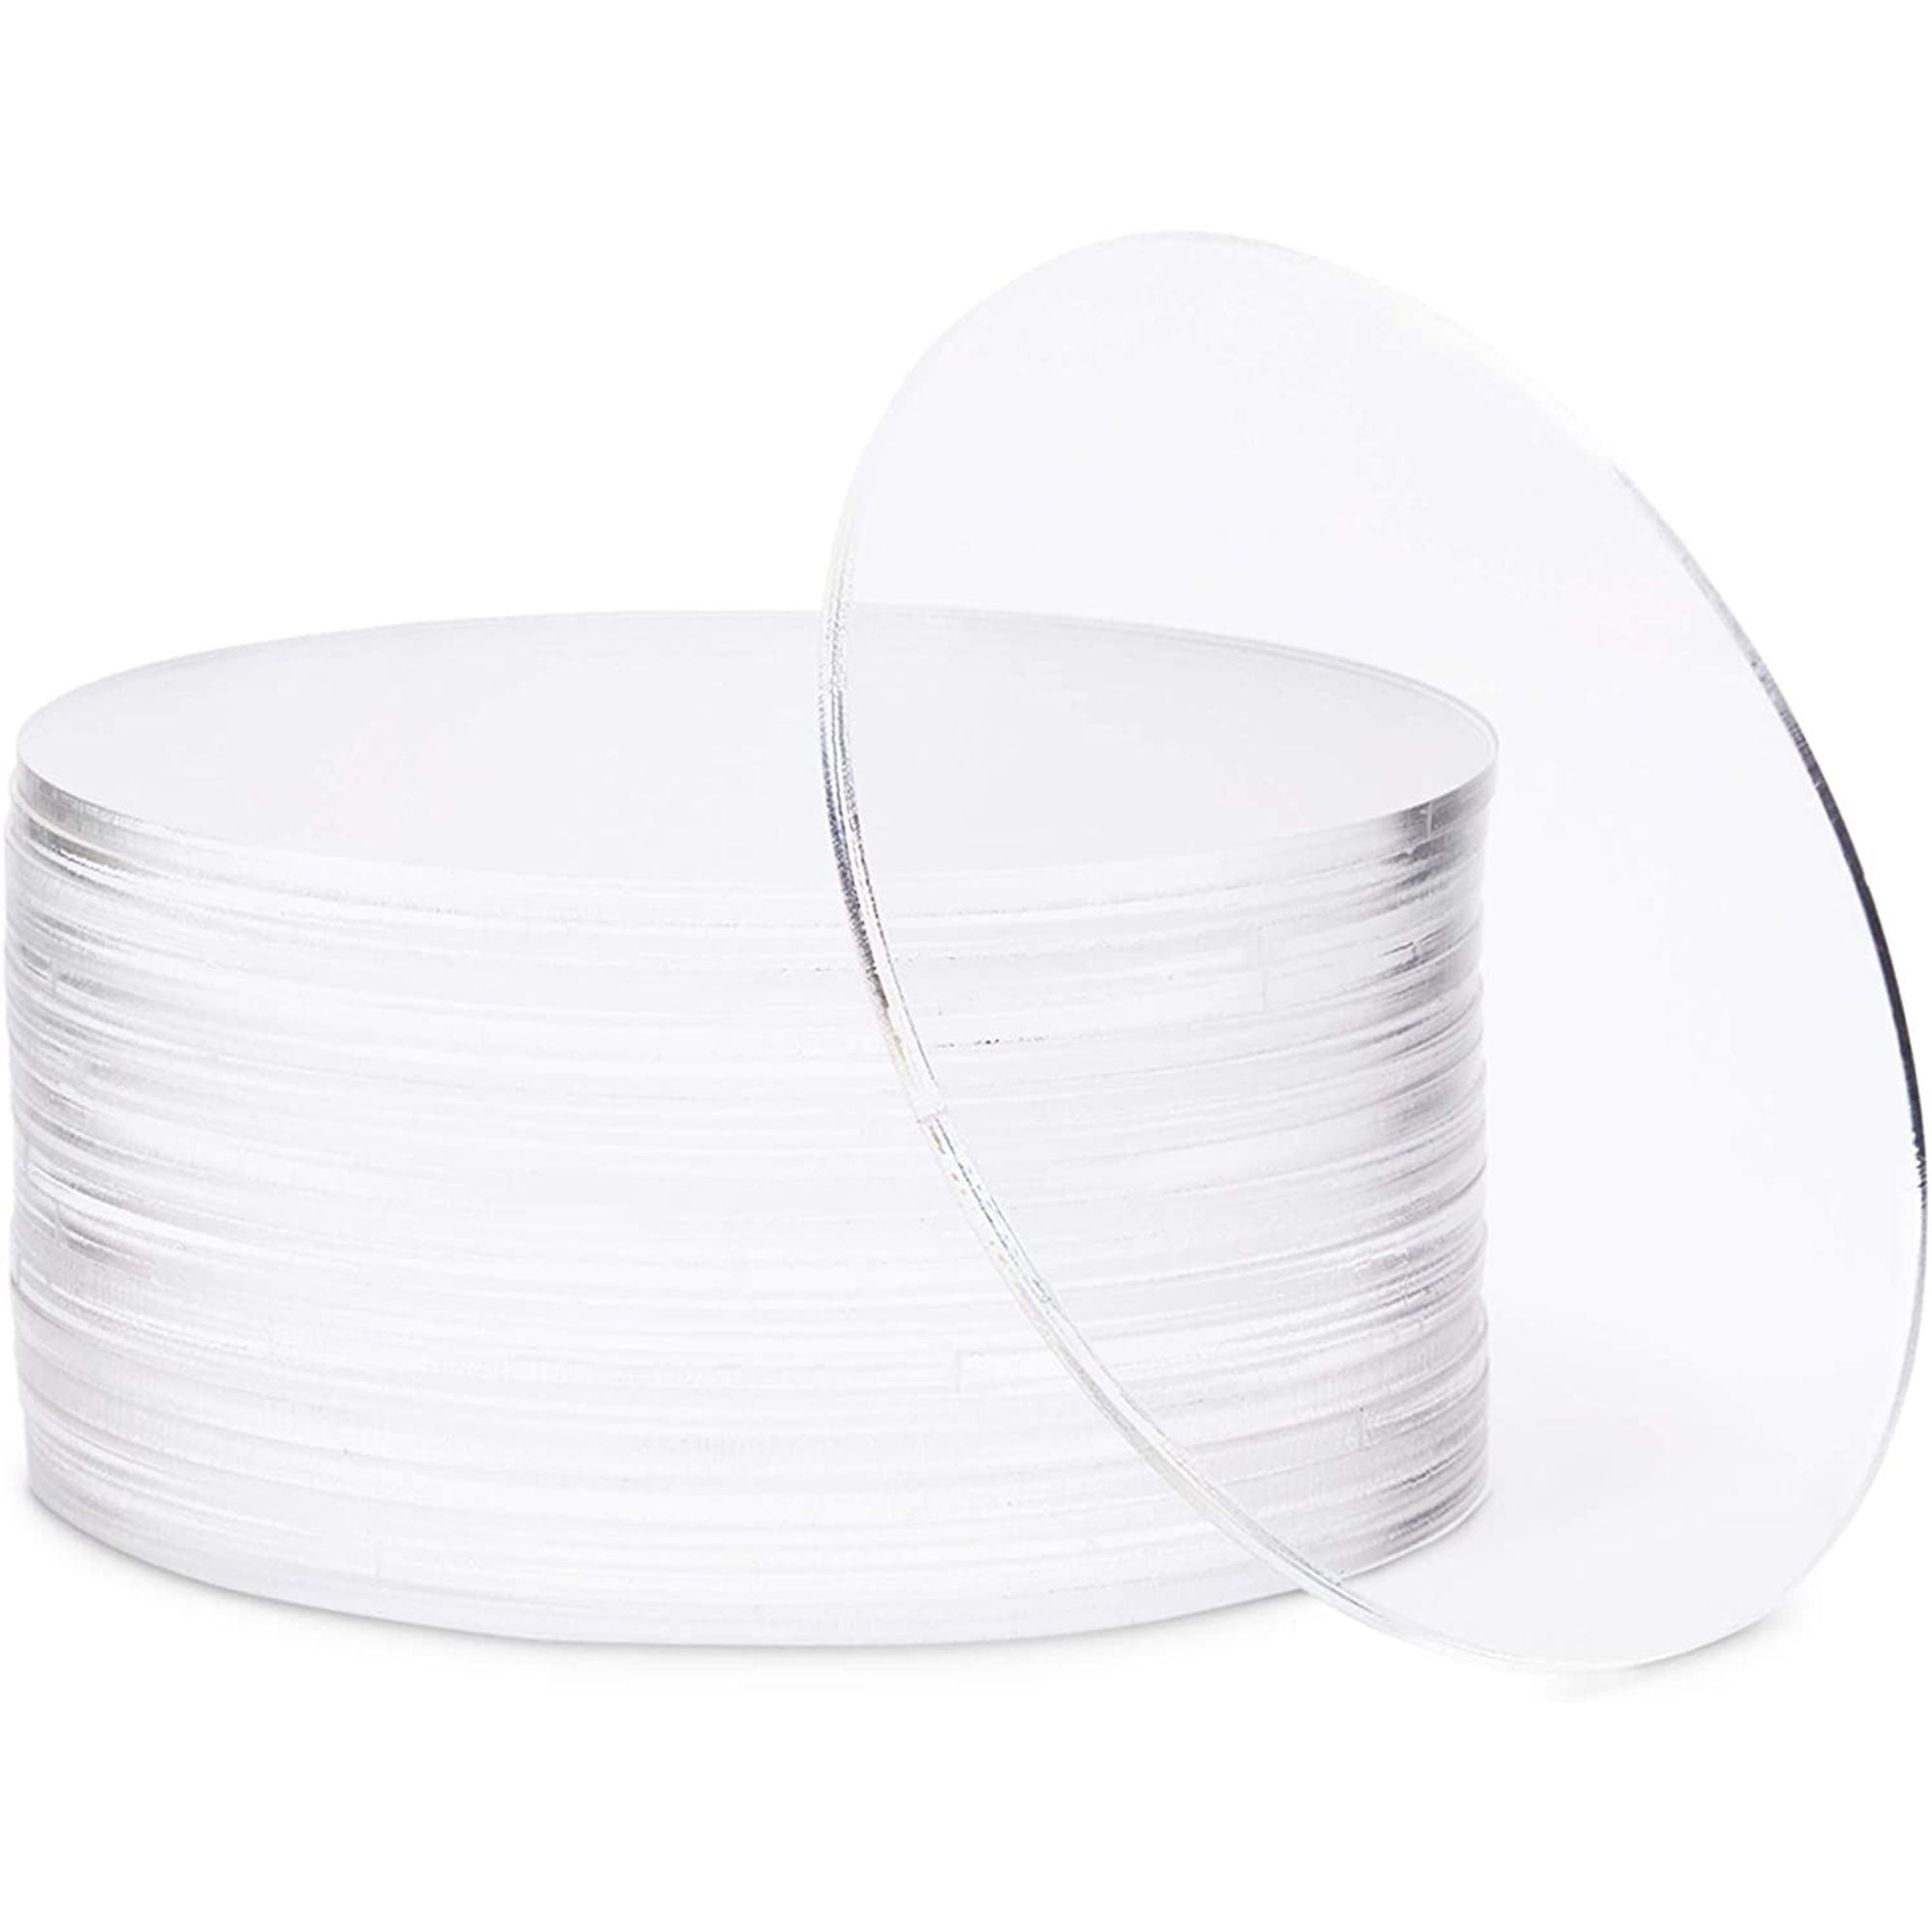 20 Pack Clear Acrylic Plastic Blank Discs Round Circles For Arts And